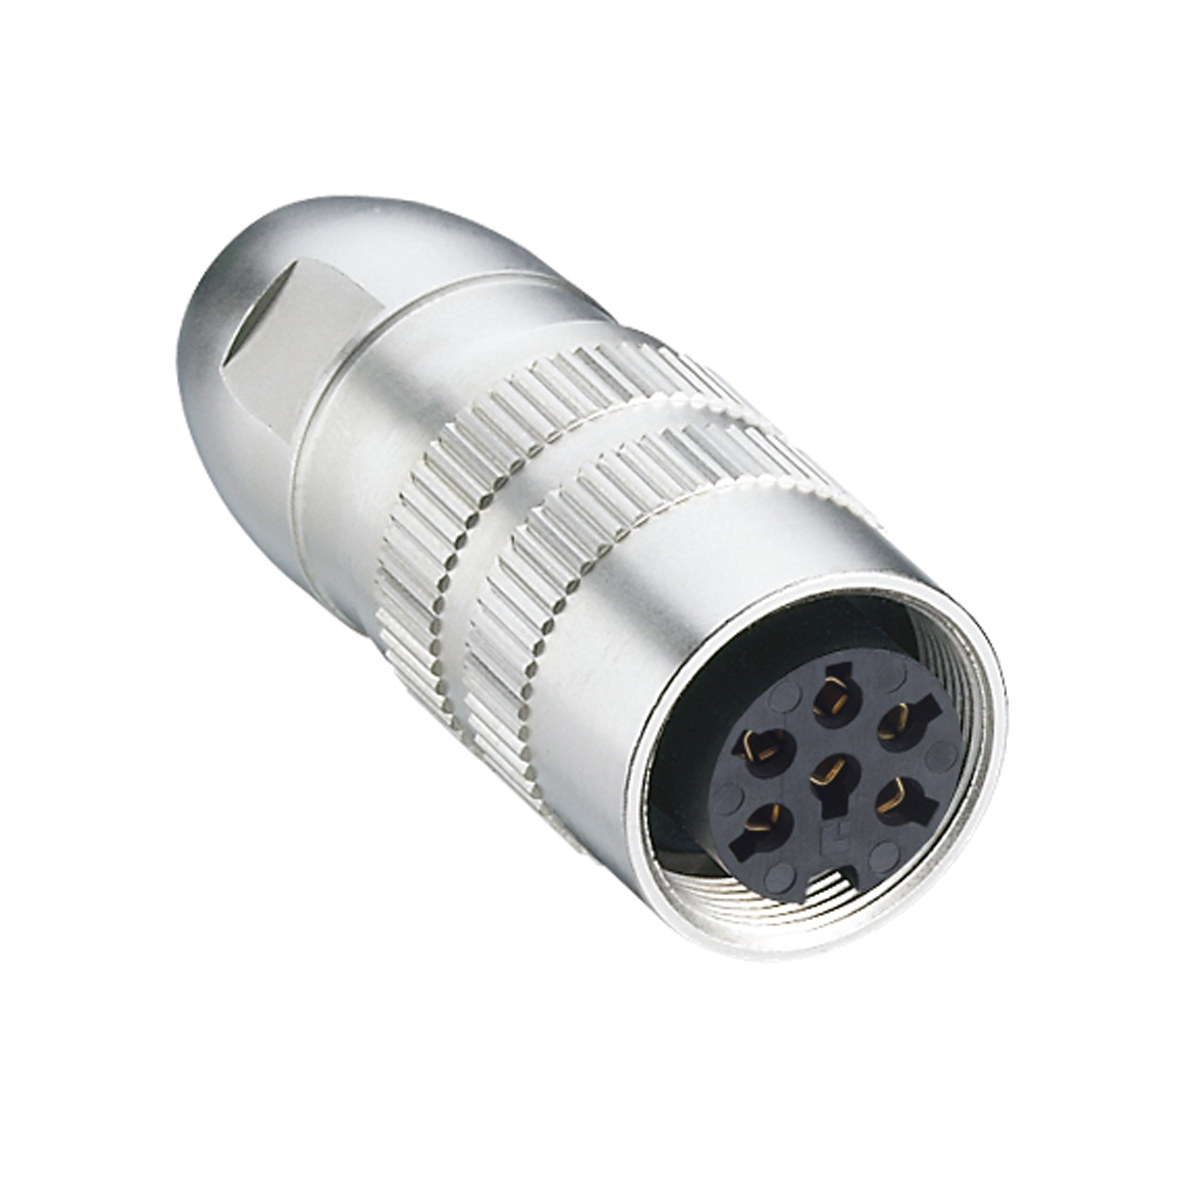 Lumberg: 321 (Series 03 | Circular connectors with threaded joint M16 acc. to IEC 61076-2-106, IP40/IP68)